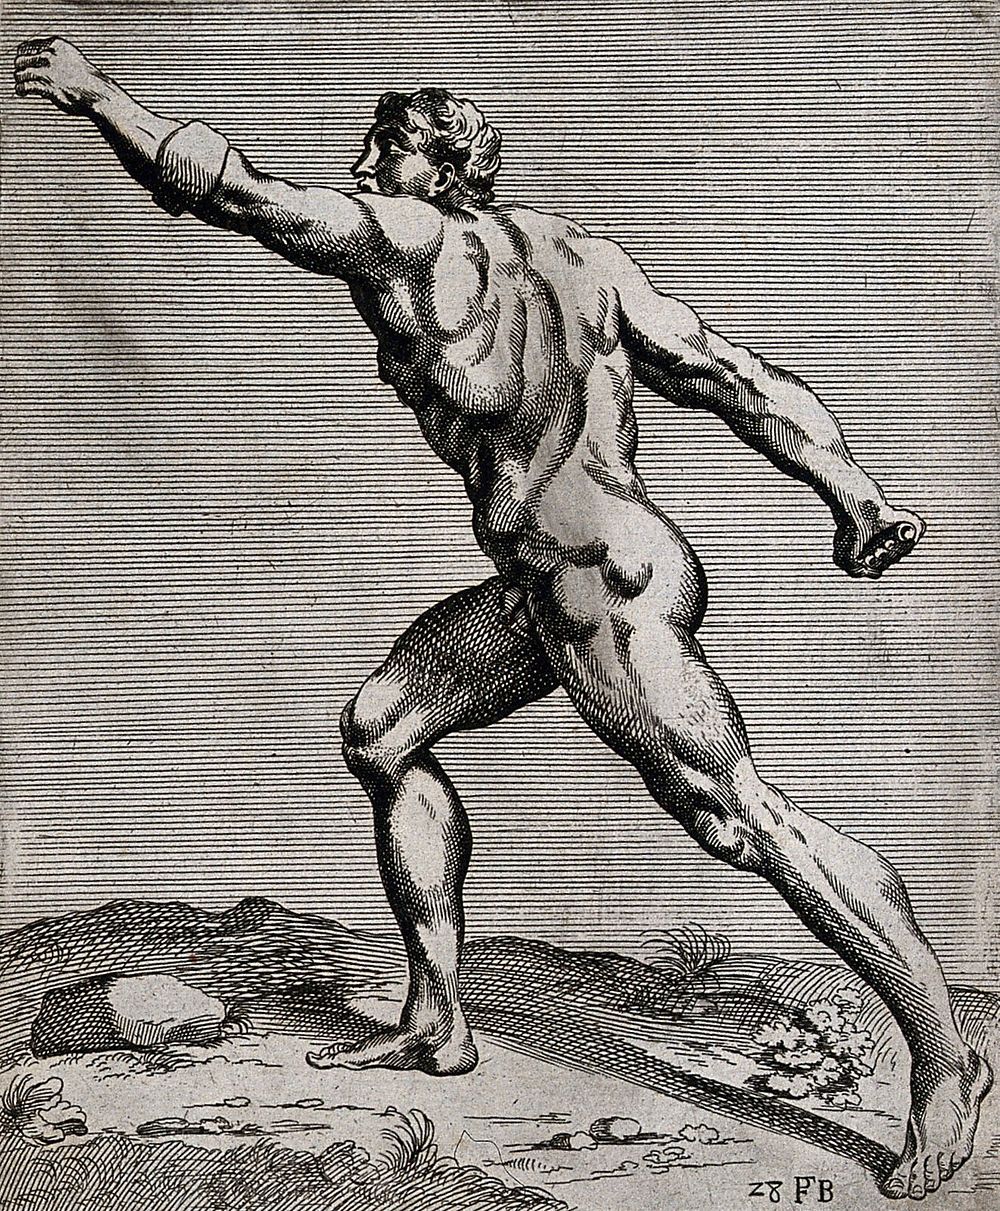 The Borghese Gladiator seen from the left, raising his left arm. Etching by F. Perrier, 1638.